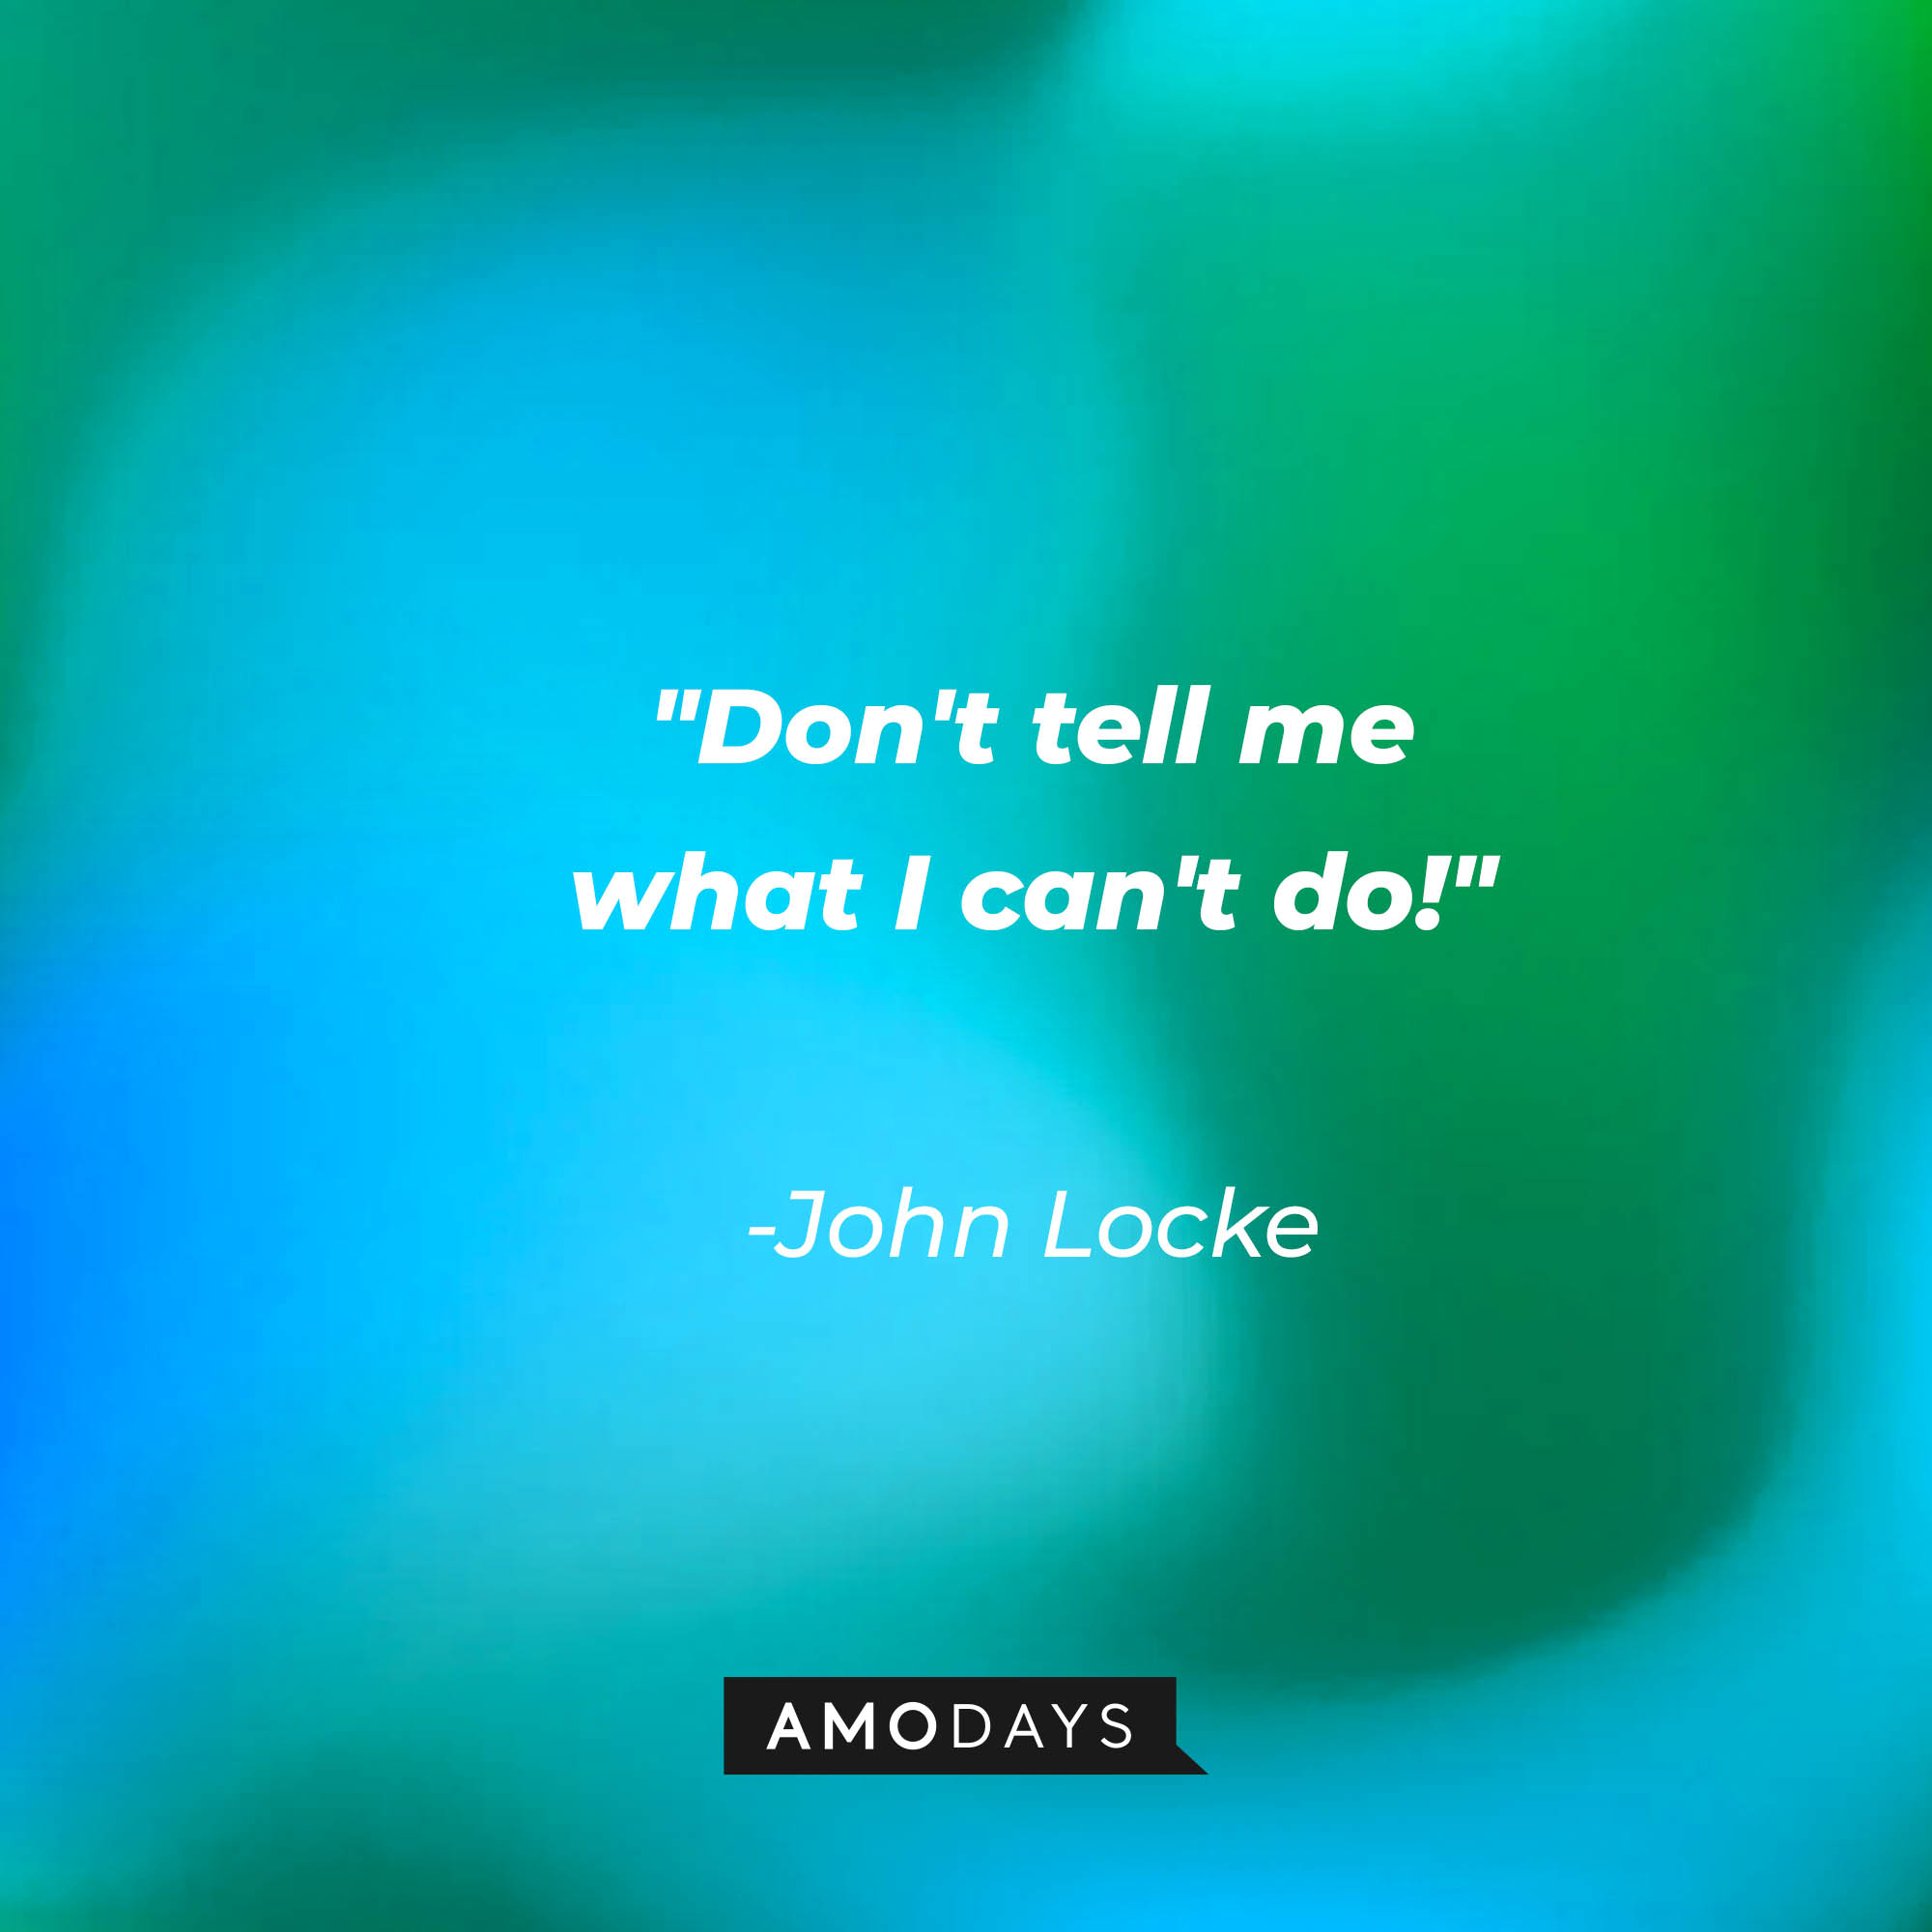 John Locke's quote: "Don't tell me what I can't do!" | Source: AmoDays